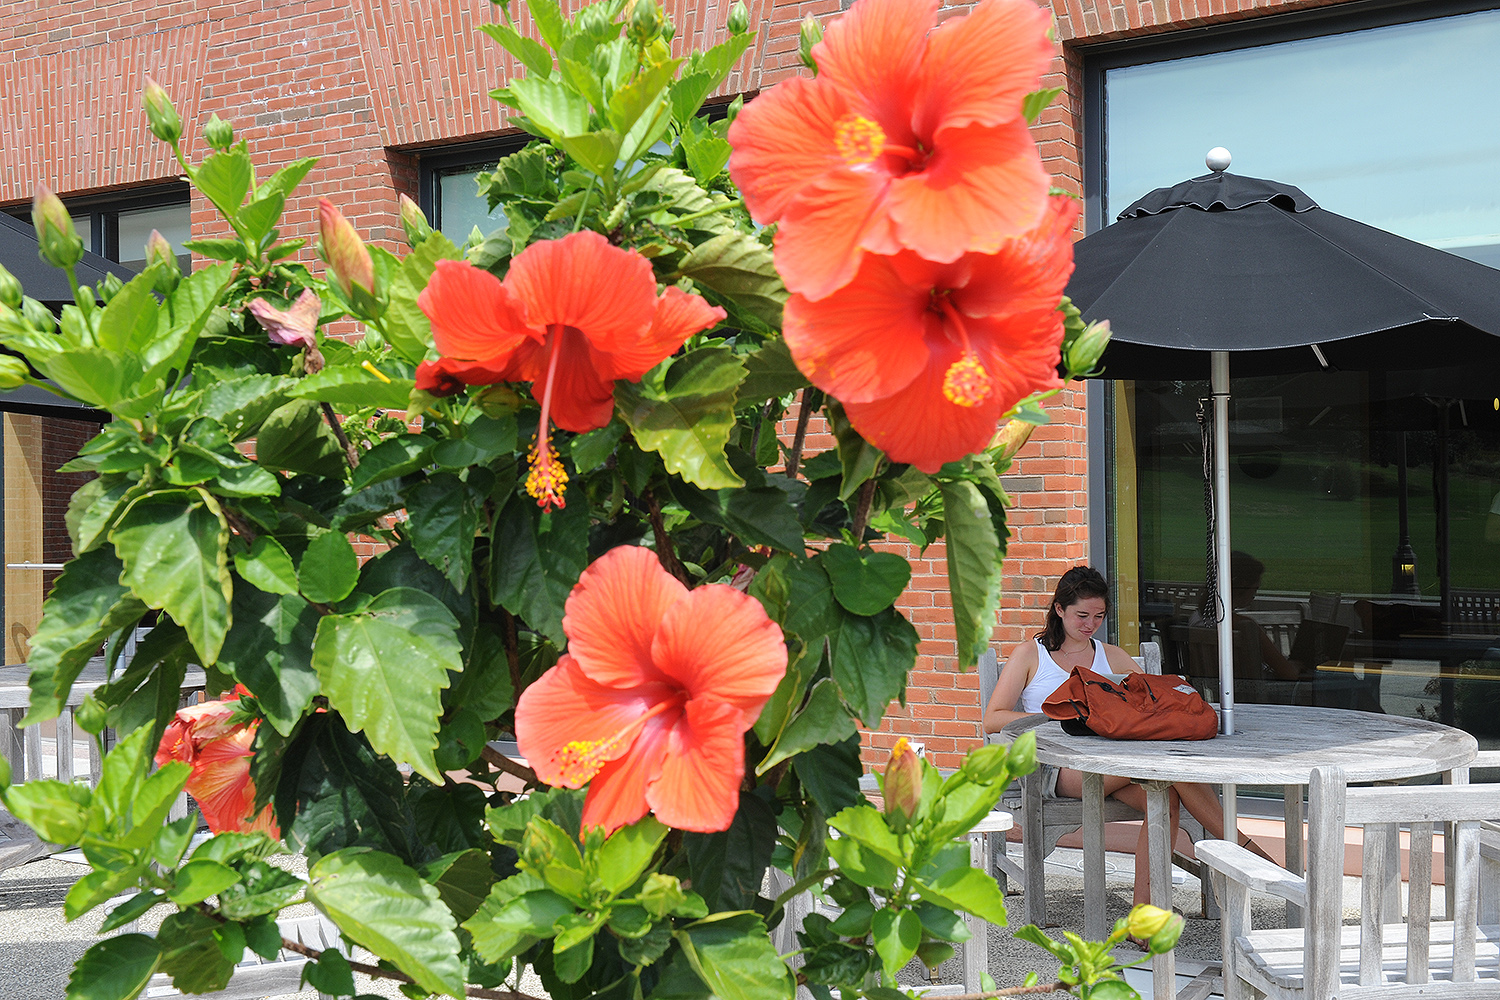 Peach hibiscus grow in planters near Usdan and Fayerweather.